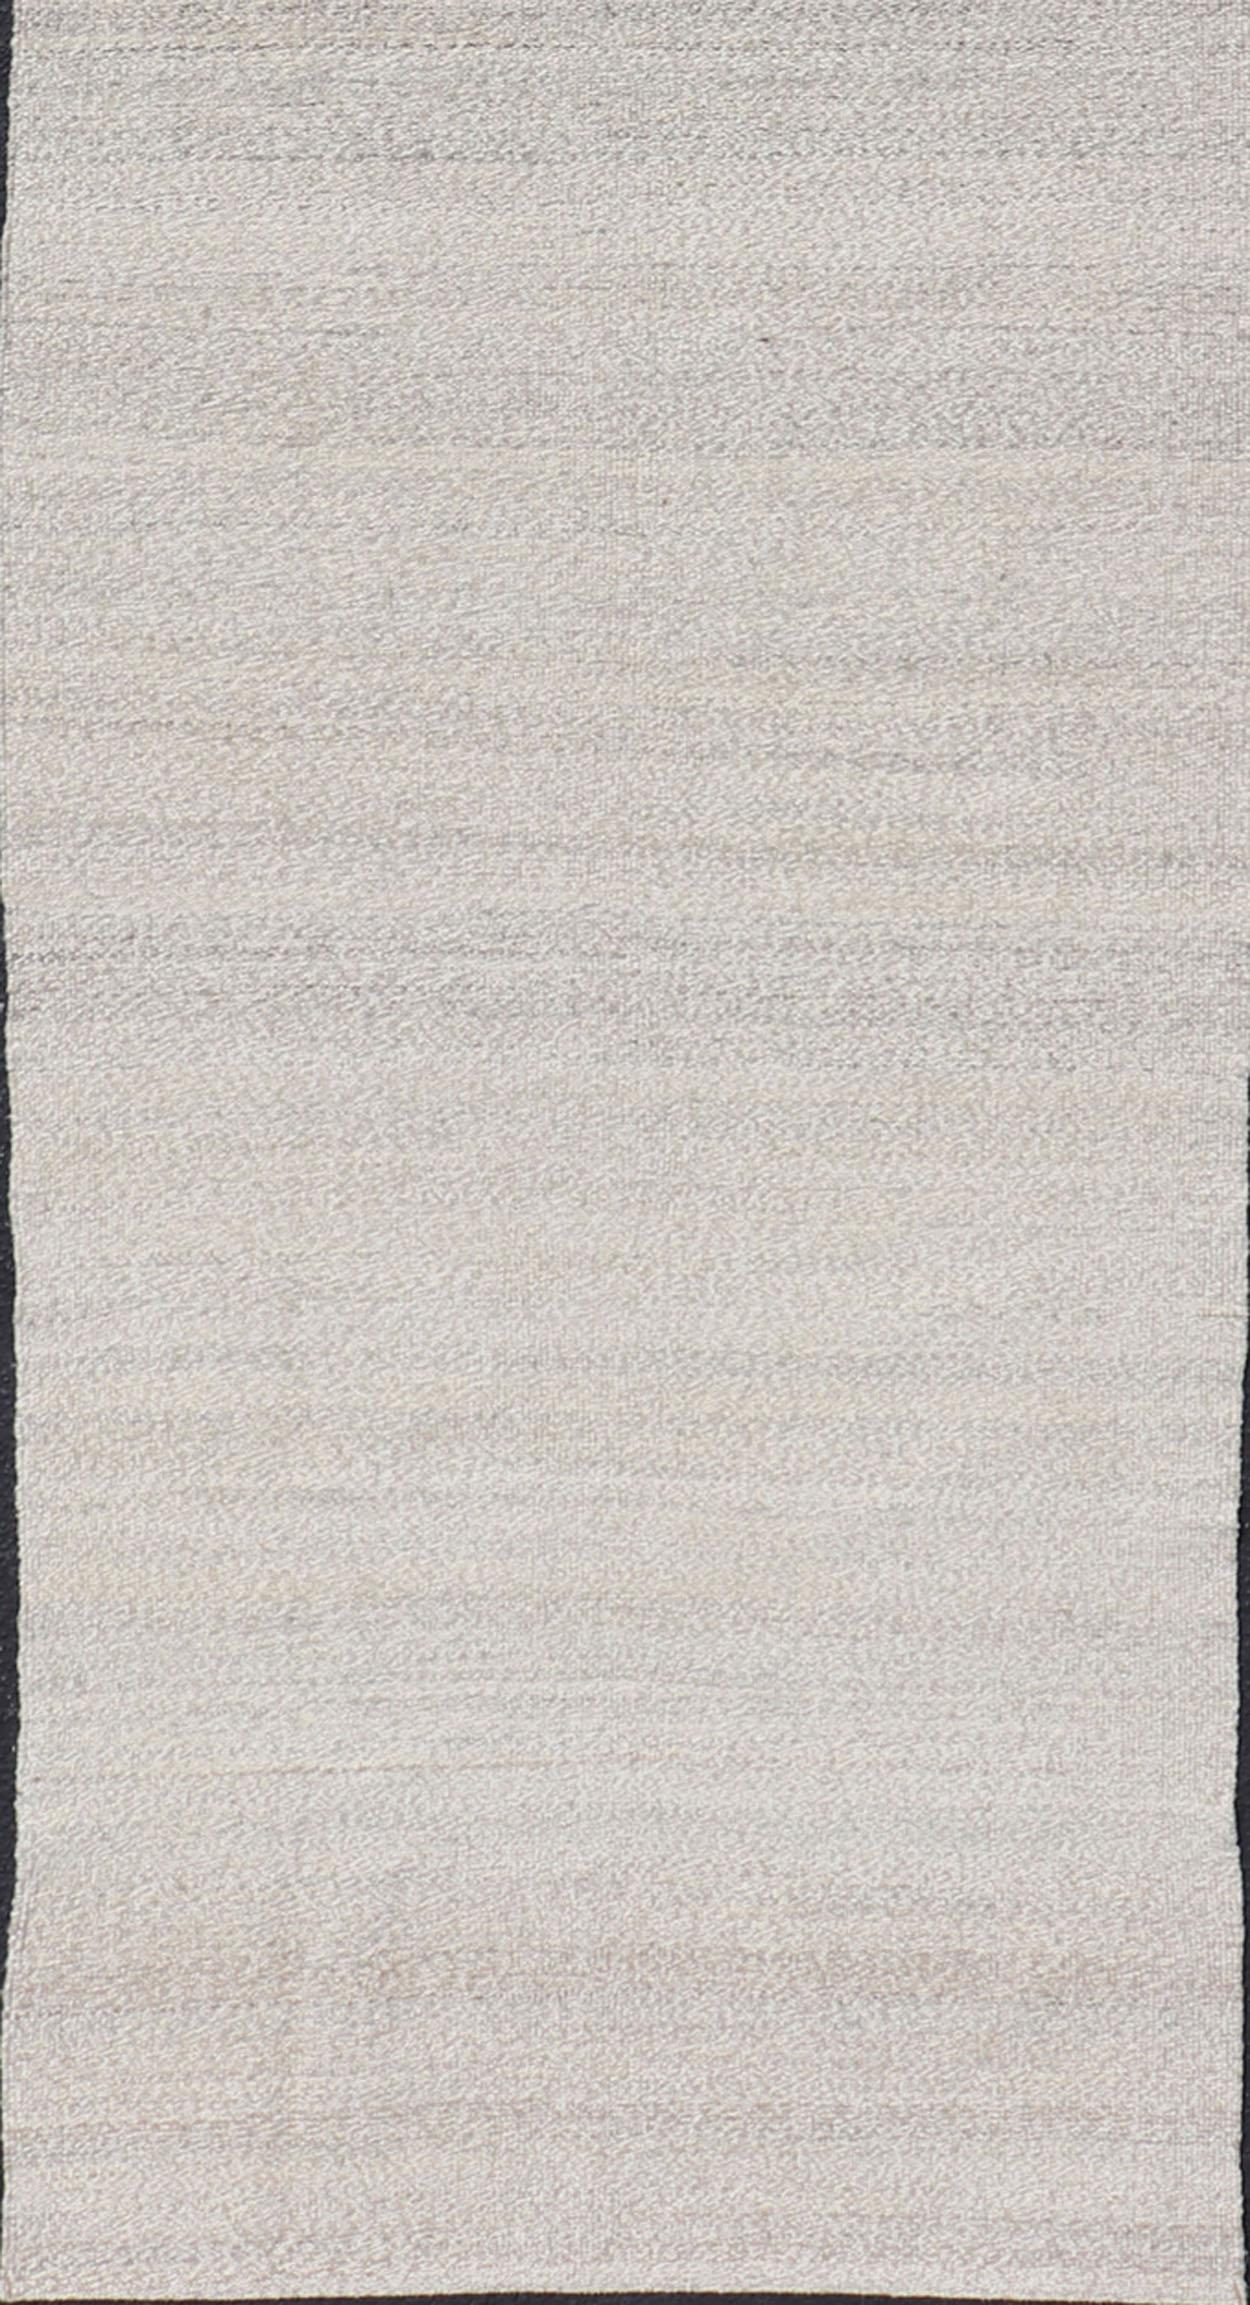 Flat-weave Kilim runner in shades of grey and cream, rug AFG-31757, country of origin / type: Afghanistan / Kilim

This muted piece features an all-over design that evokes casual and easy vibes. Perfect for modern design projects and well-suited